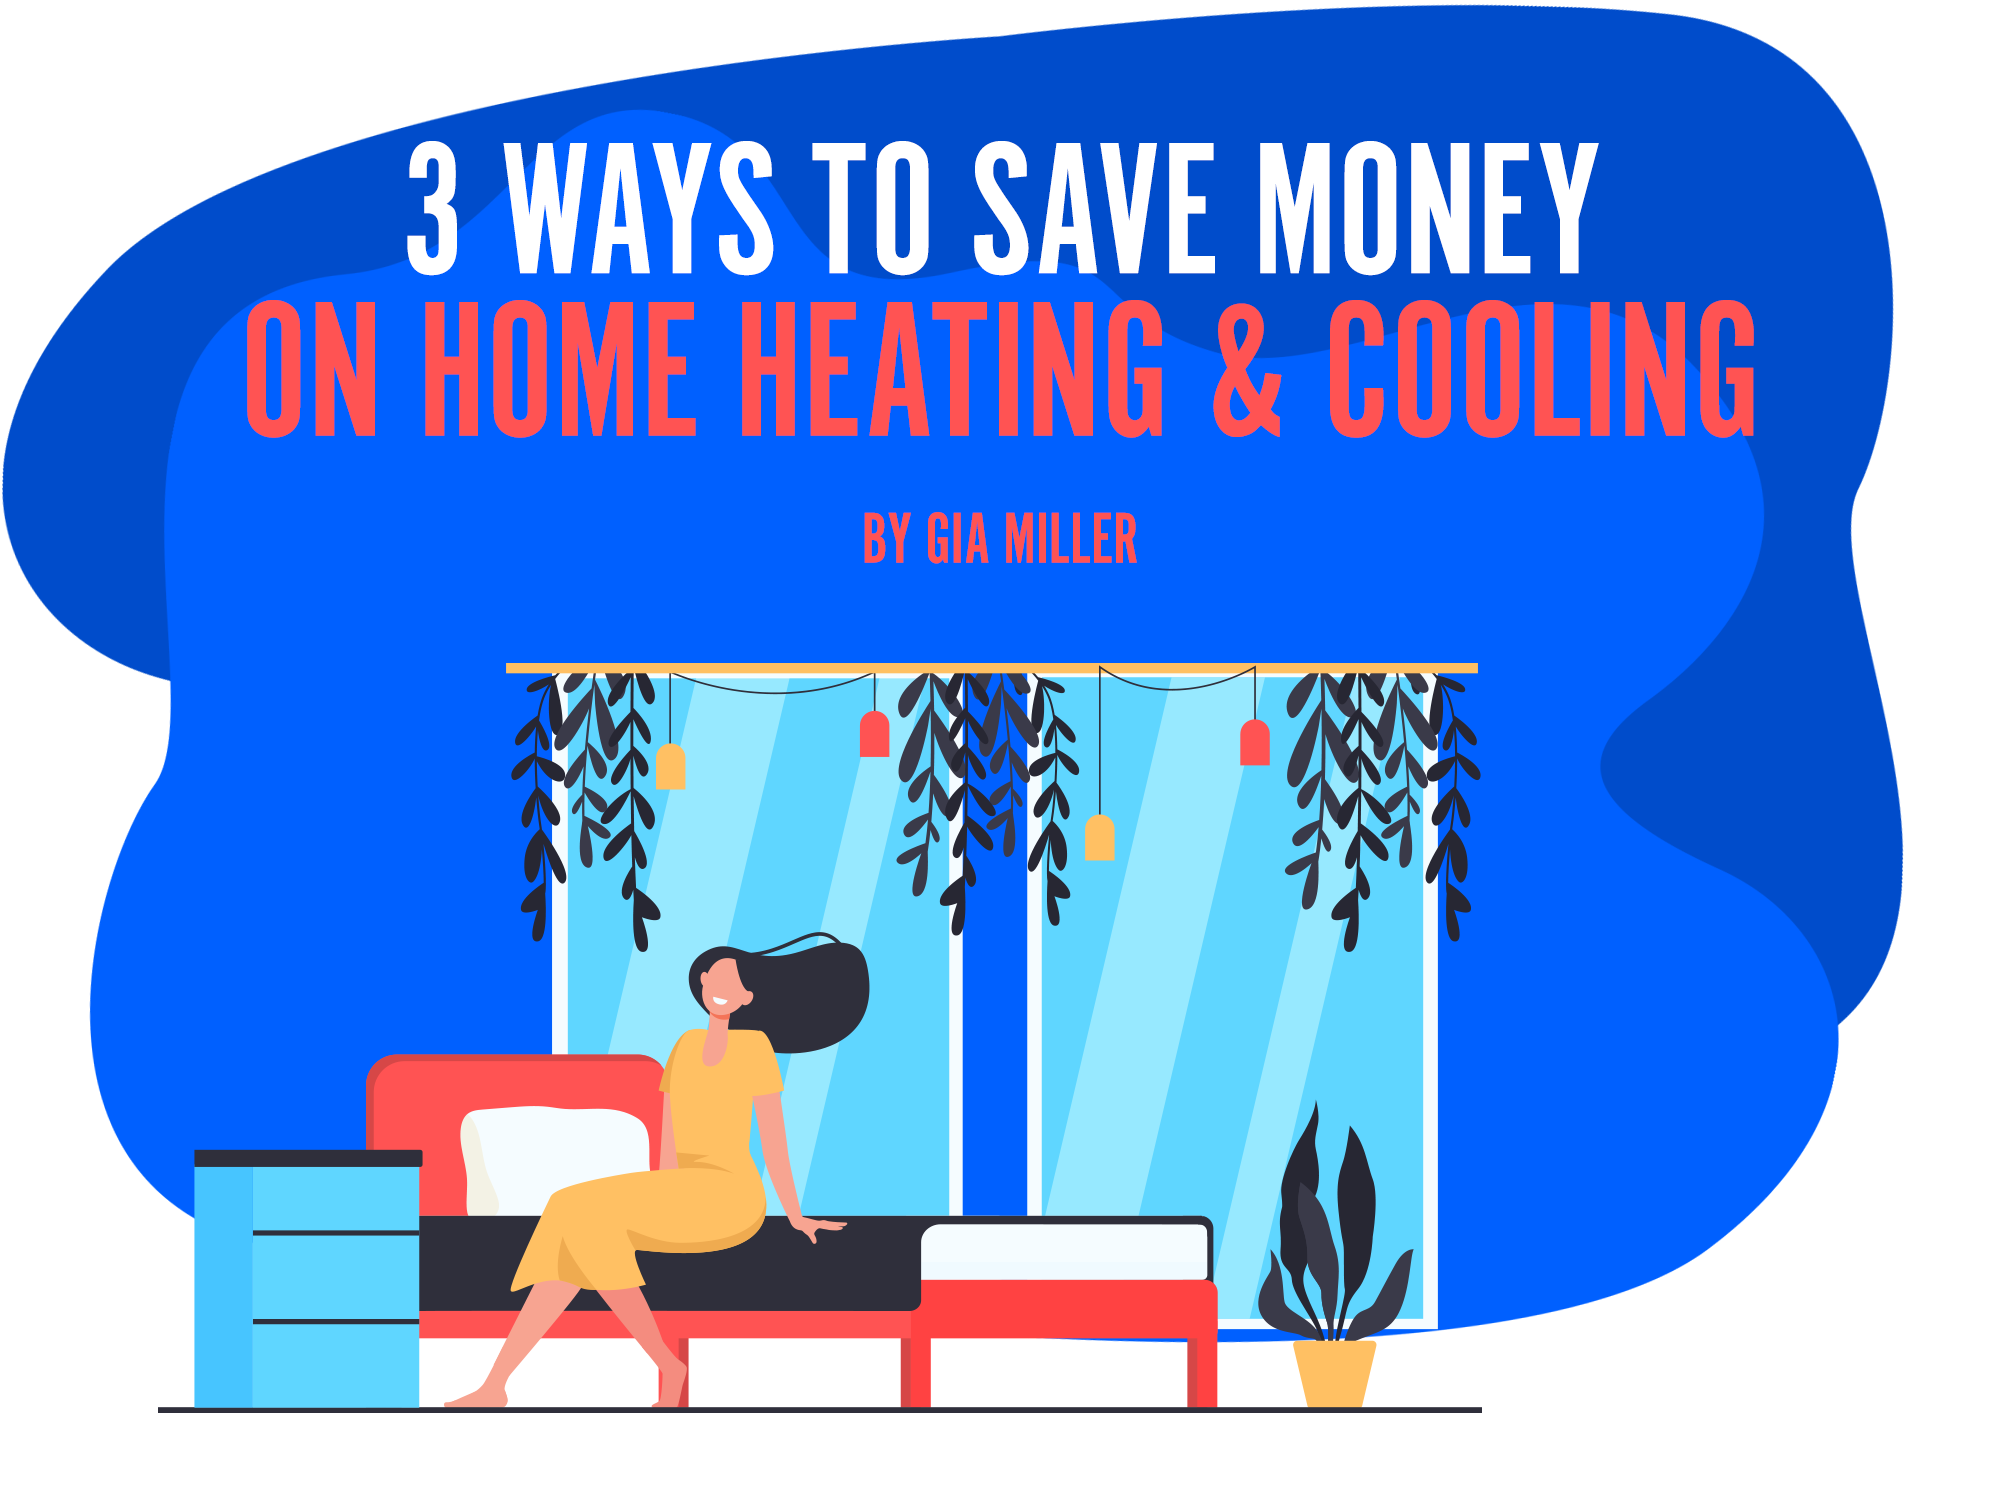 3 Ways to Save Money on Home Heating & Cooling